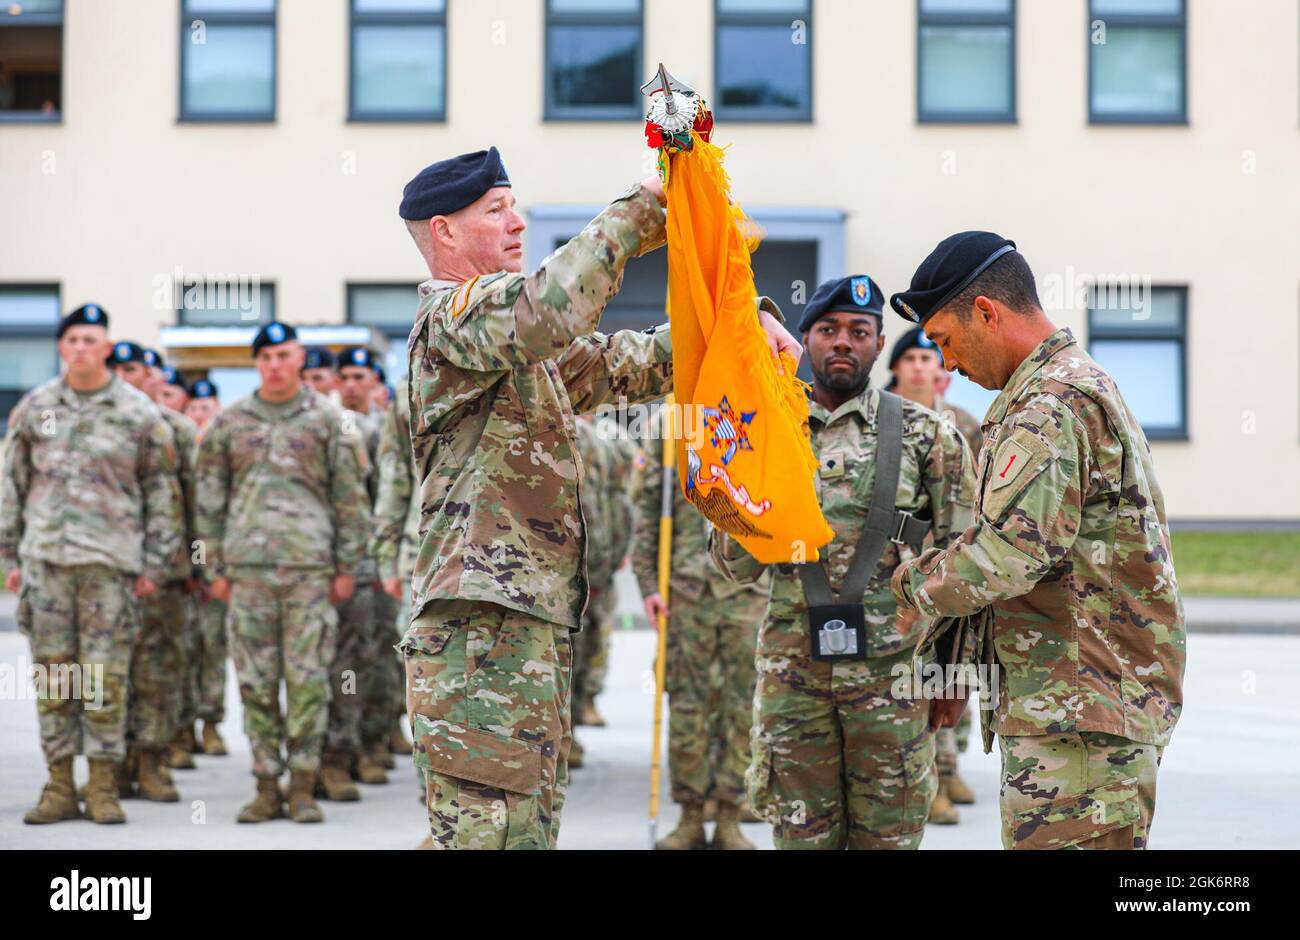 The 2nd Battalion 'Dreadnaught Battalion,' 34th Armored Regiment Commander Lt. Col. Kenneth Selby and Command Sgt. Maj. Christopher Albanese uncase their colors during a transfer of authority ceremony at Drawsko Pomorskie Training Area Poland, August 18, 2021. 'The uncasing of these colors is a time-honored tradition that this battalion has seen numerous times throughout the world, from Europe, Southeast Asia, the Middle East,' Selby said. 'The Dreadnaught Battalion has conducted this very ceremony with Soldiers just like you over the last 80 years all across this globe.' Stock Photo